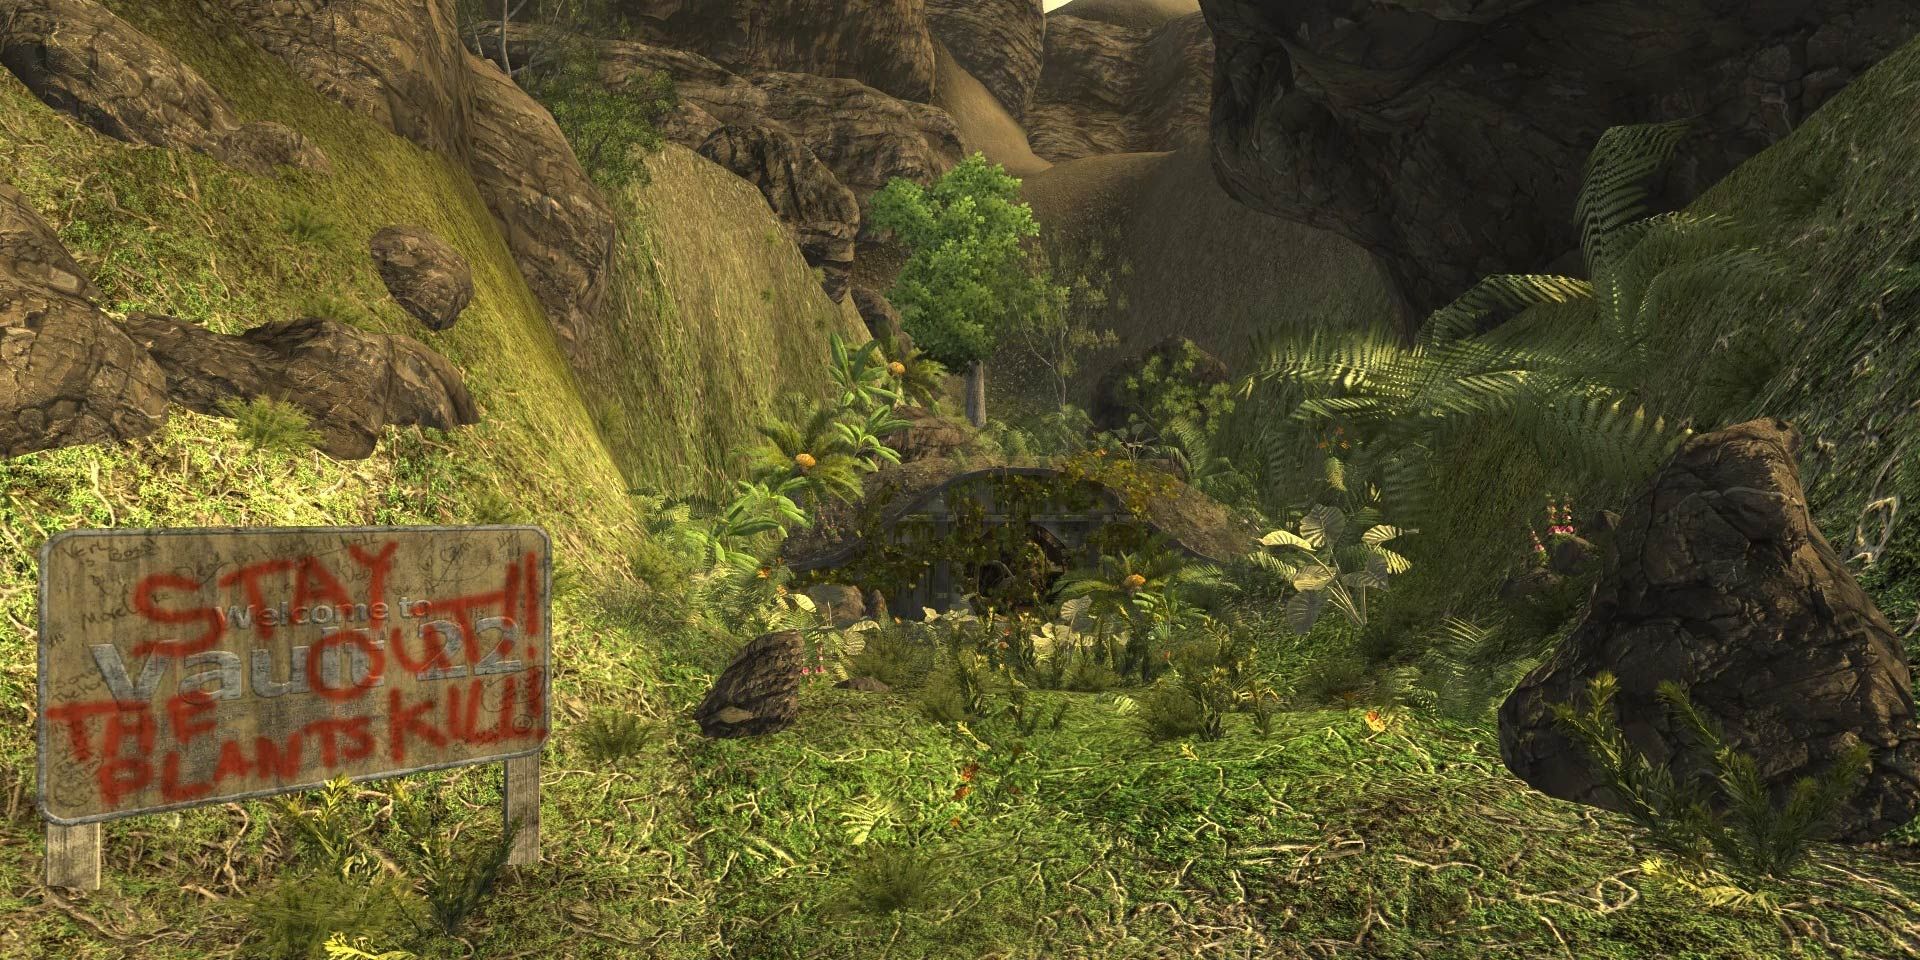 Vault 22 in Fallout: New Vegas; an overgrown vault entrance with a sign warning "Stay out! The plants kill!"